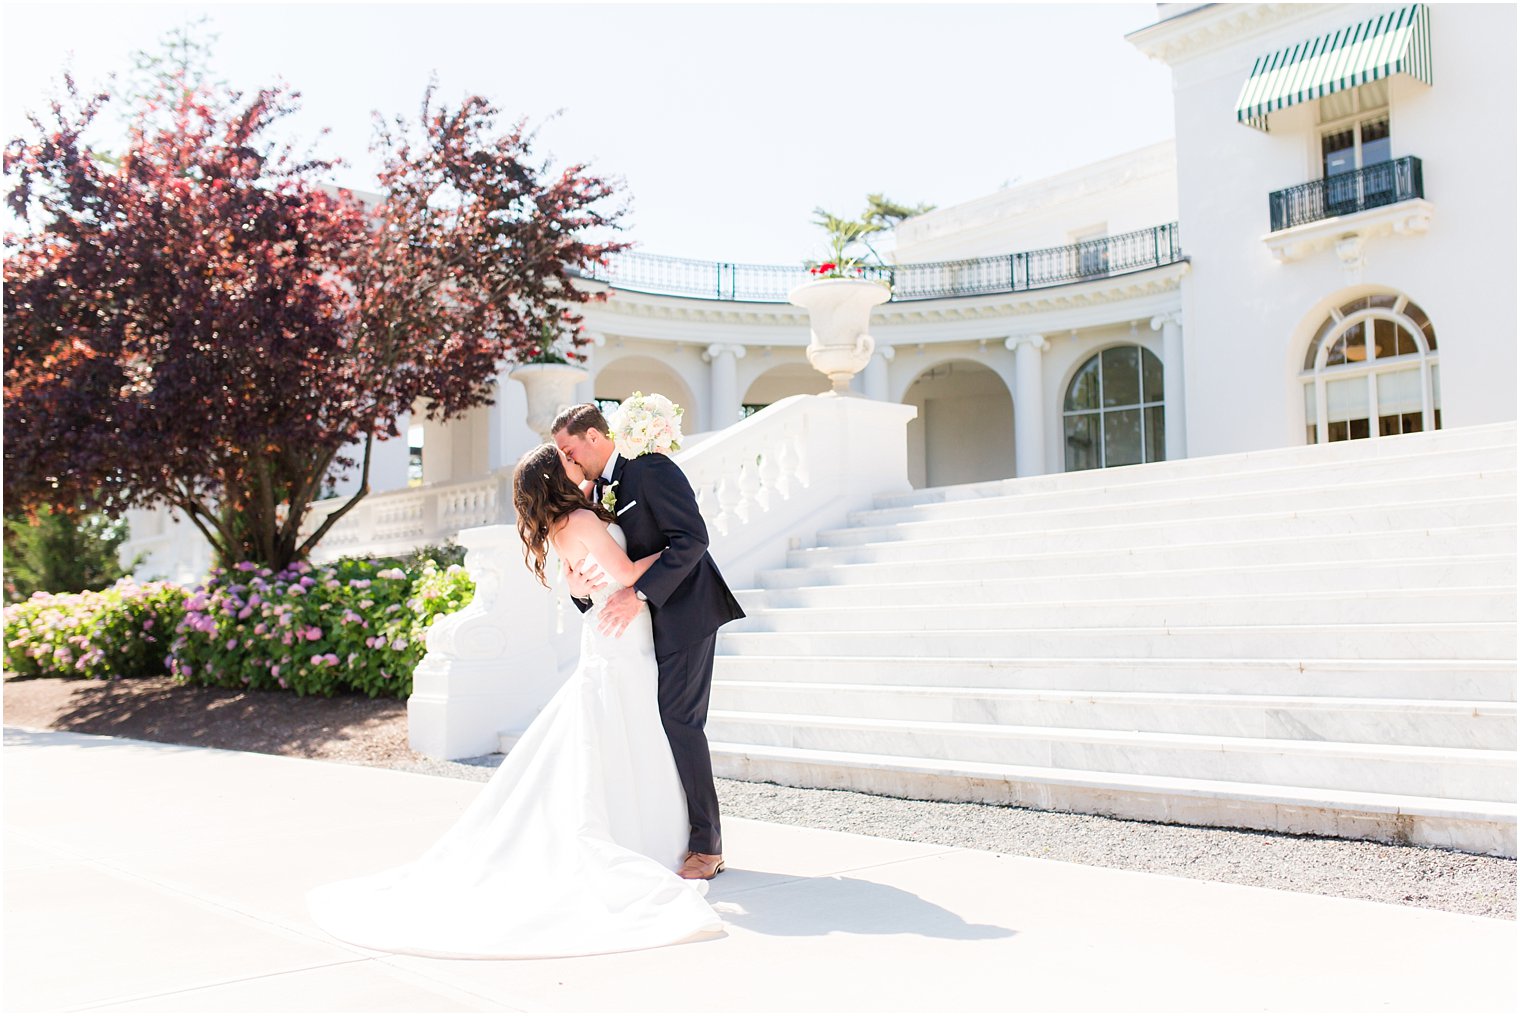 Bride and groom portrait at Monmouth University